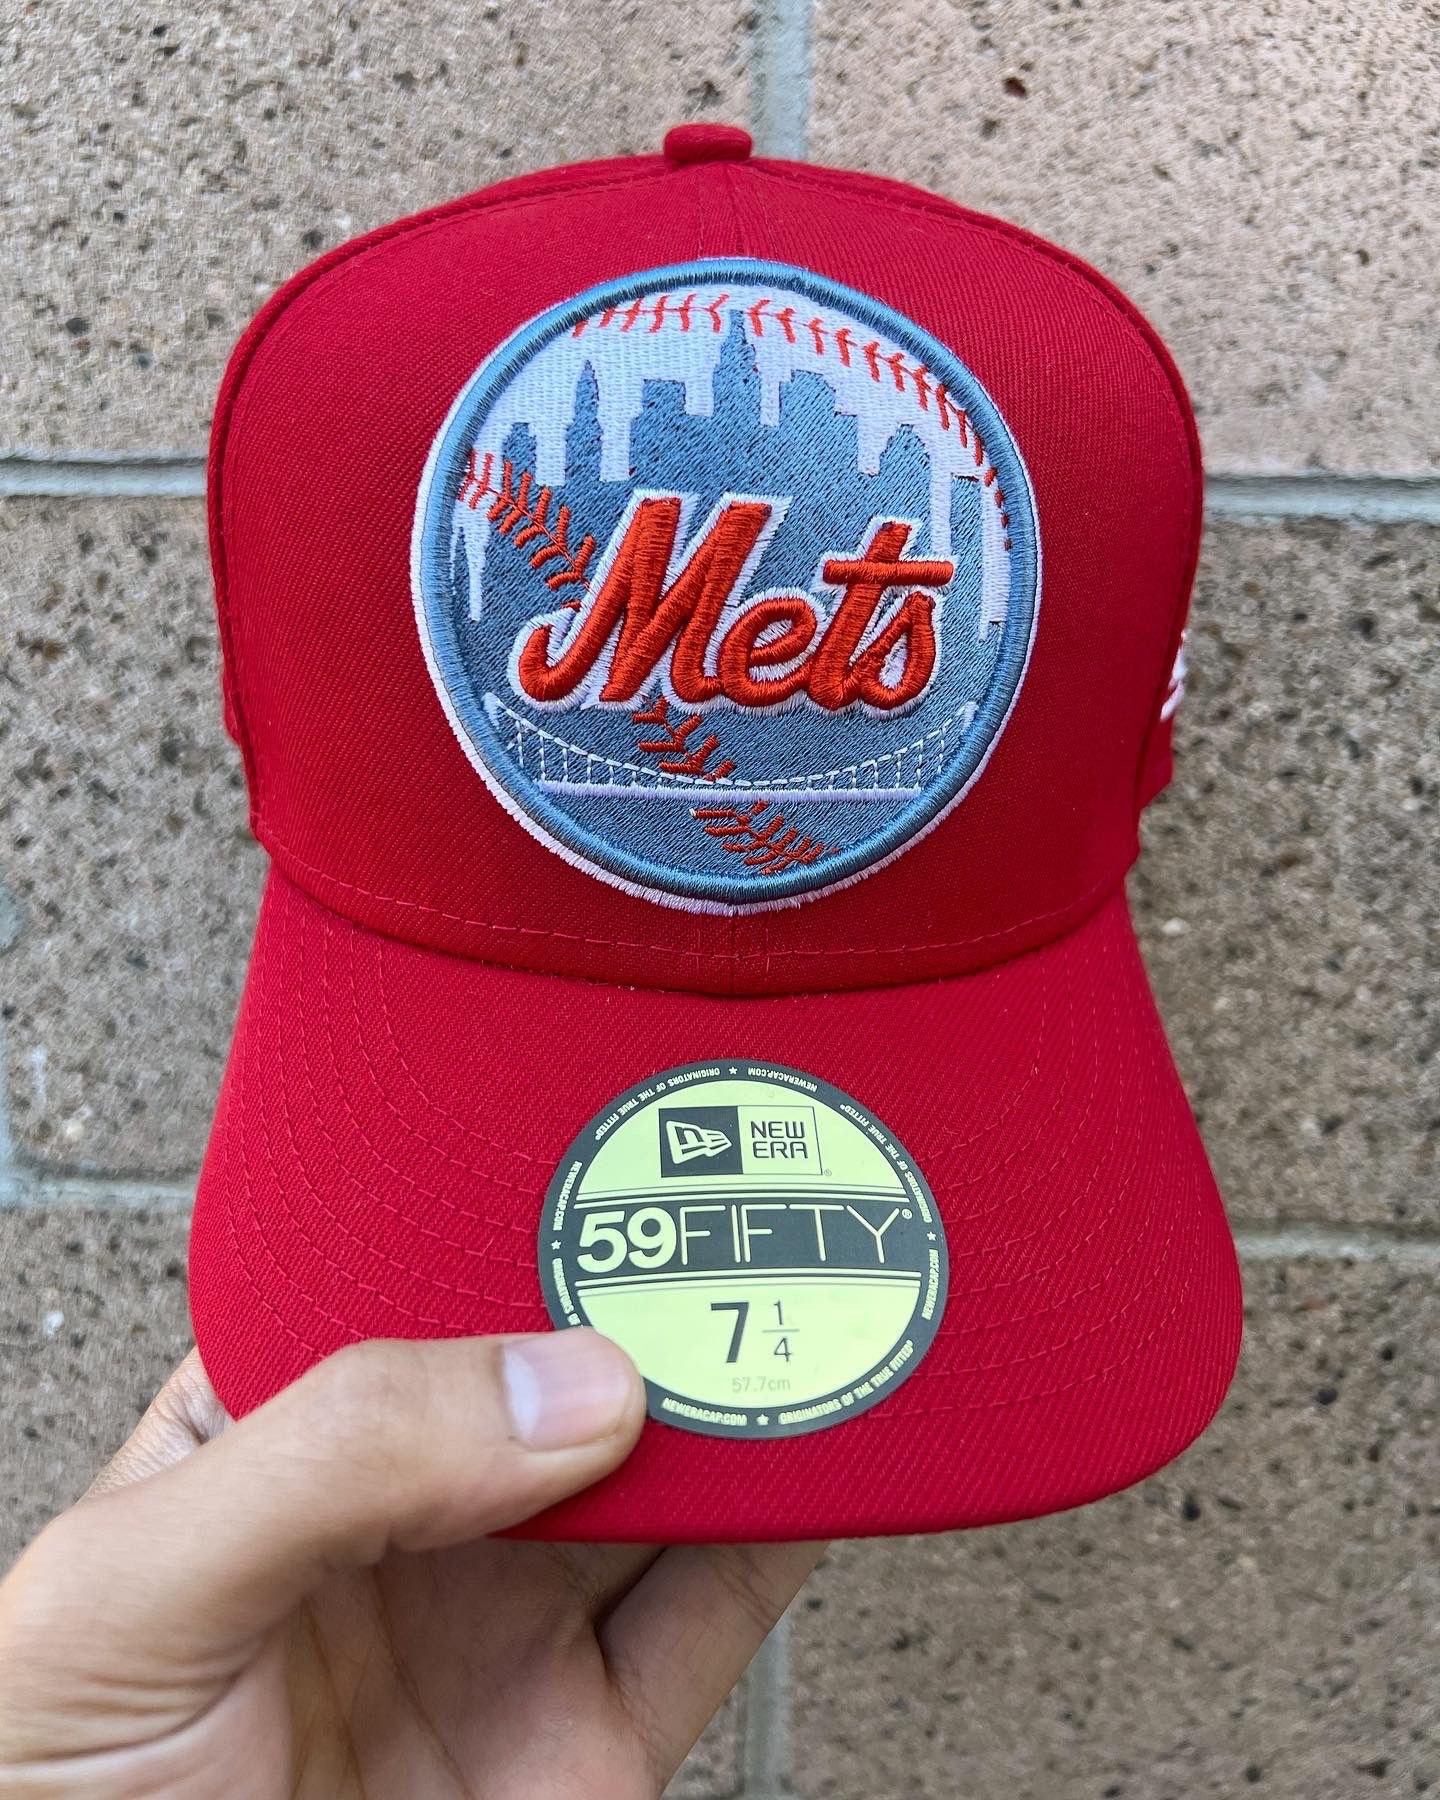 Red New York Mets 2000 World Series Patch Grey/Blueish Under Brim fitted cap 7 1/4